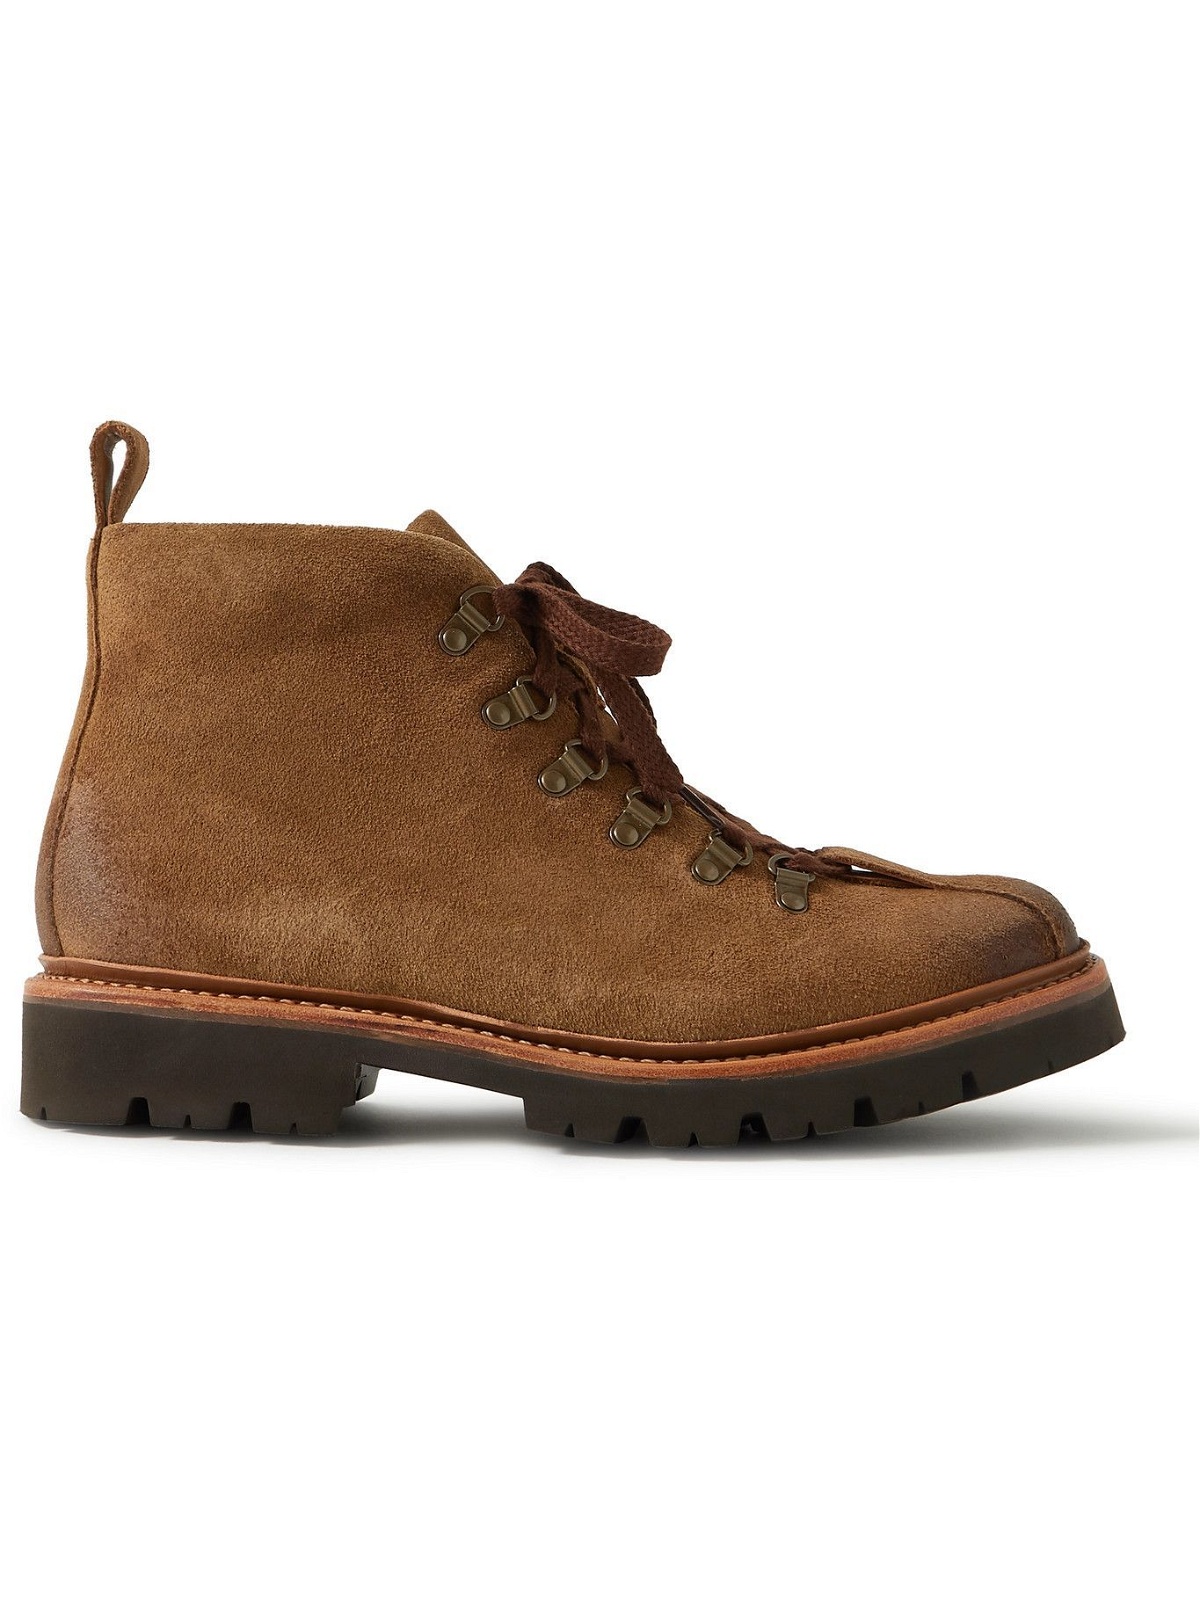 Grenson - Bobby Suede Boots - Brown Grenson